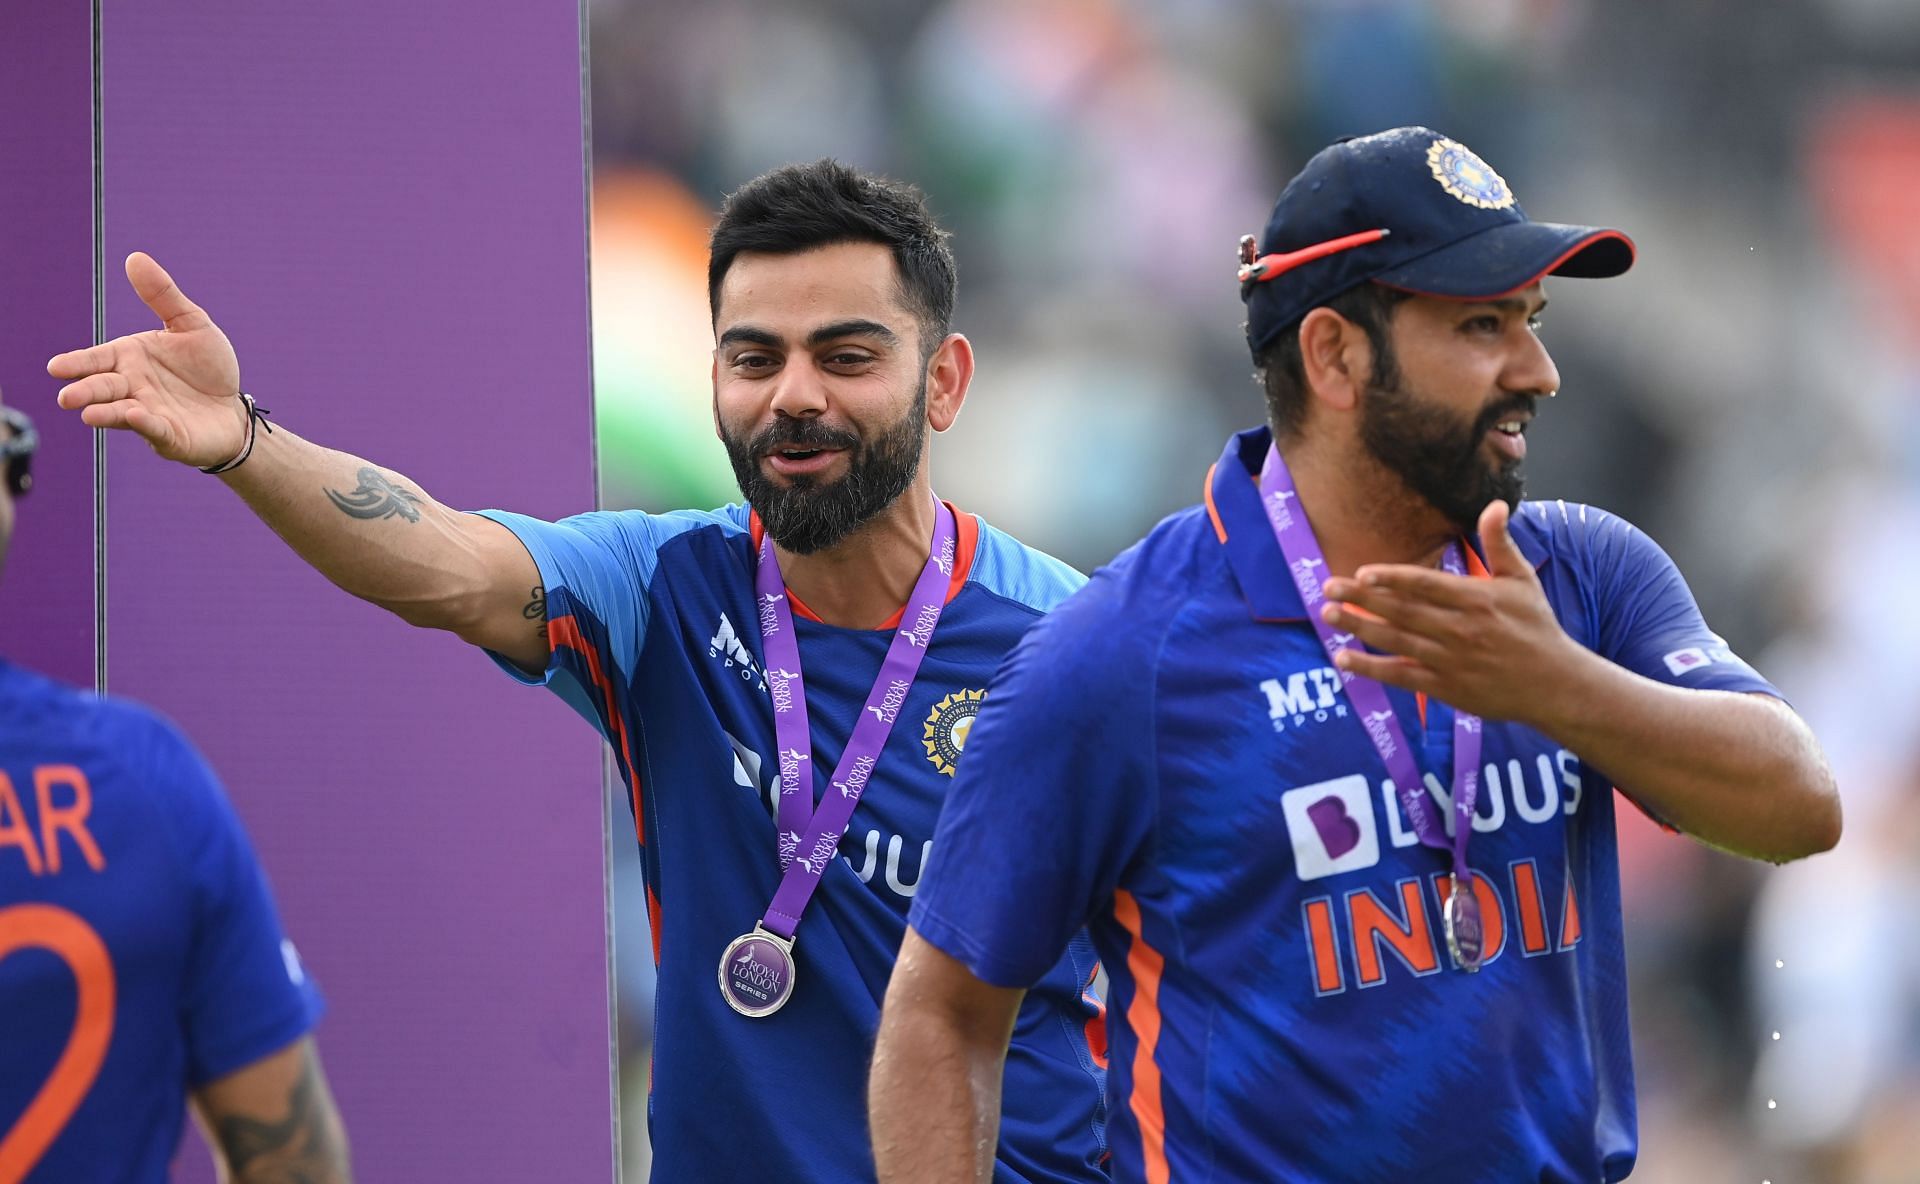 Virat Kohli and Rohit Sharma will be back in the Indian squad for the ODI series against Sri Lanka.